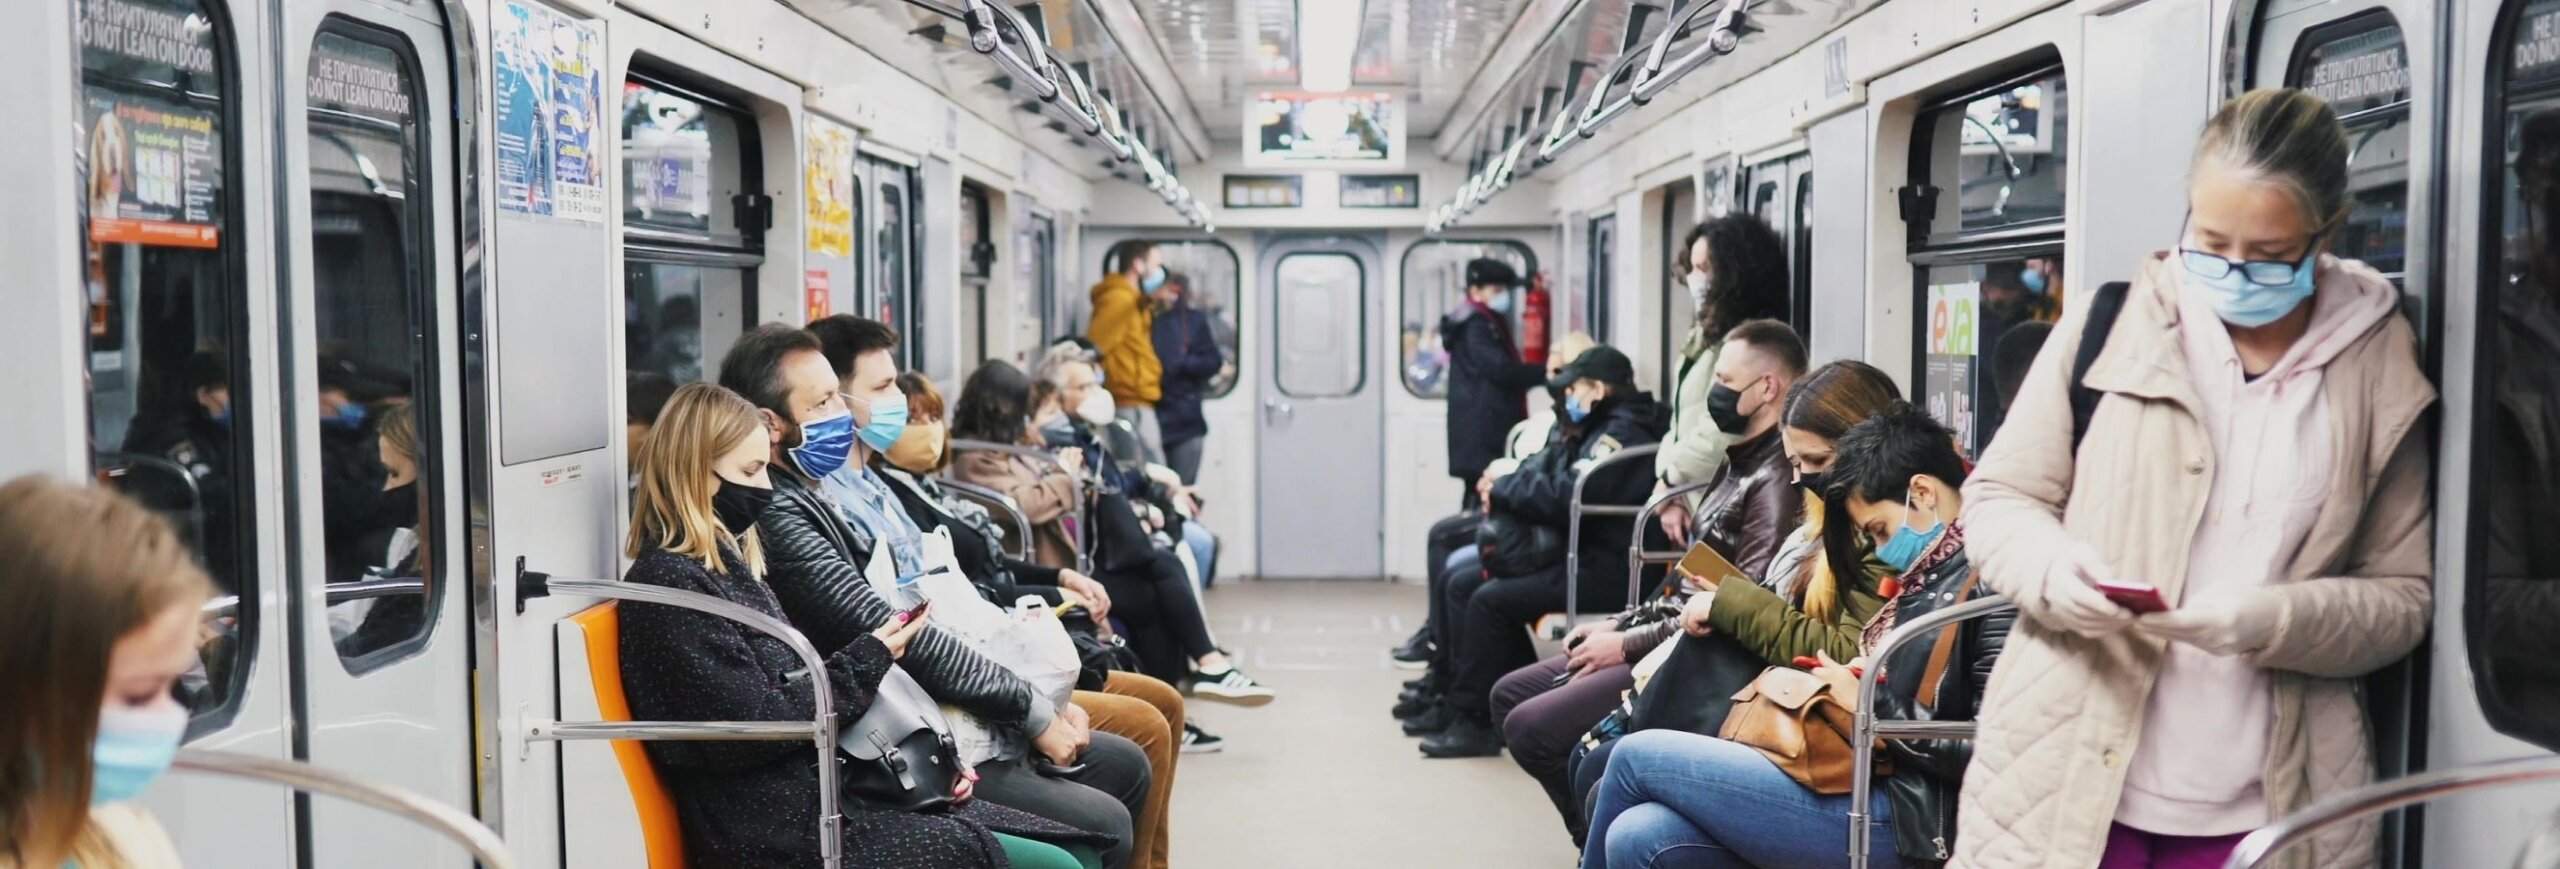 People sitting in a subway wearing masks